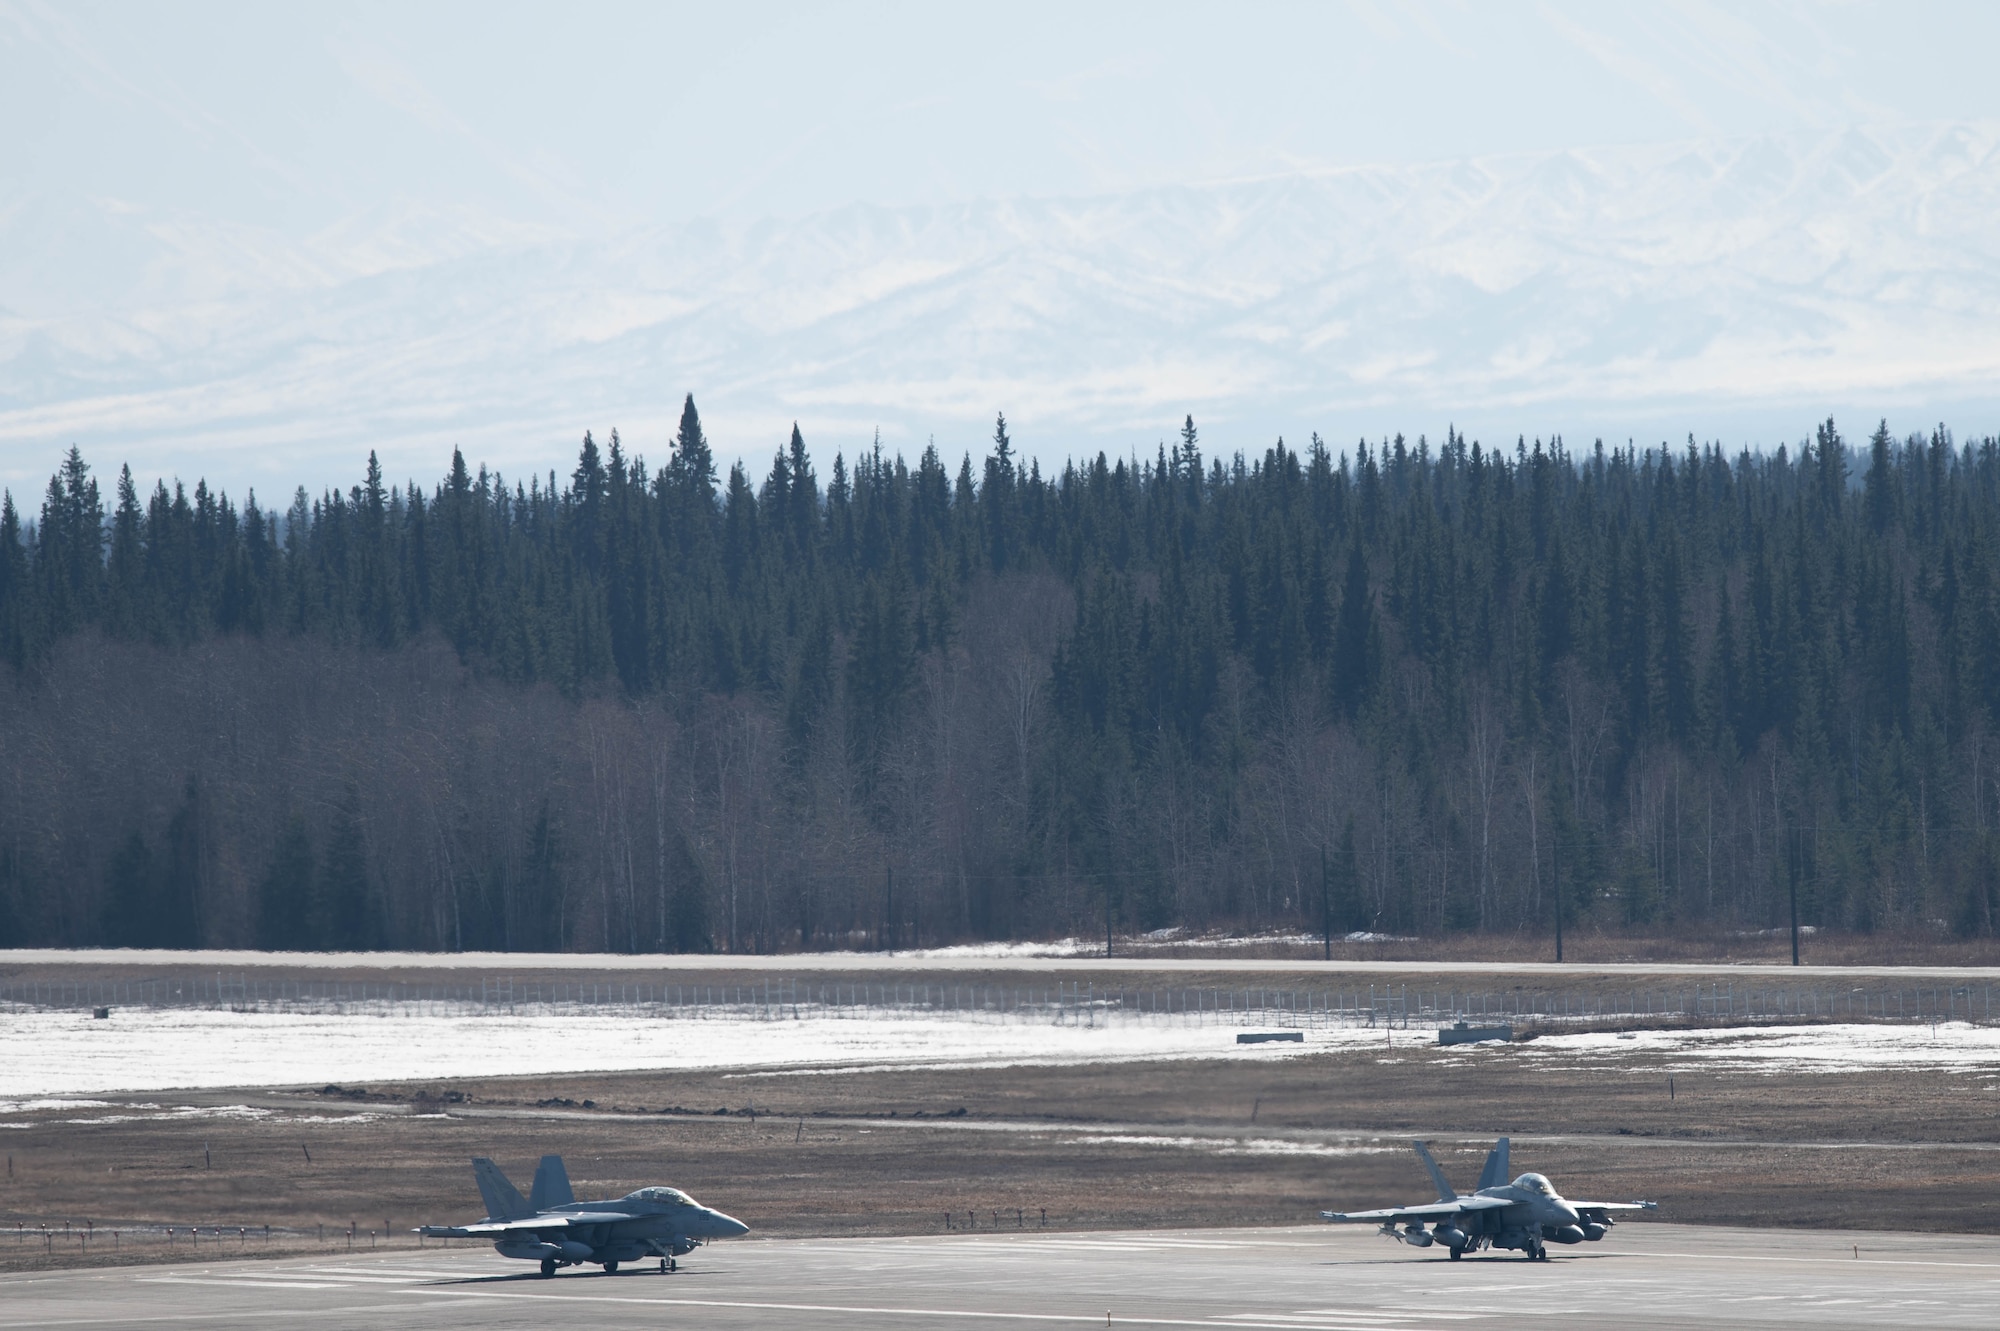 Two EA-18G Growlers assigned to the Electronic Attack Squadron (VAQ) 131 prepare to take off on the flightline.